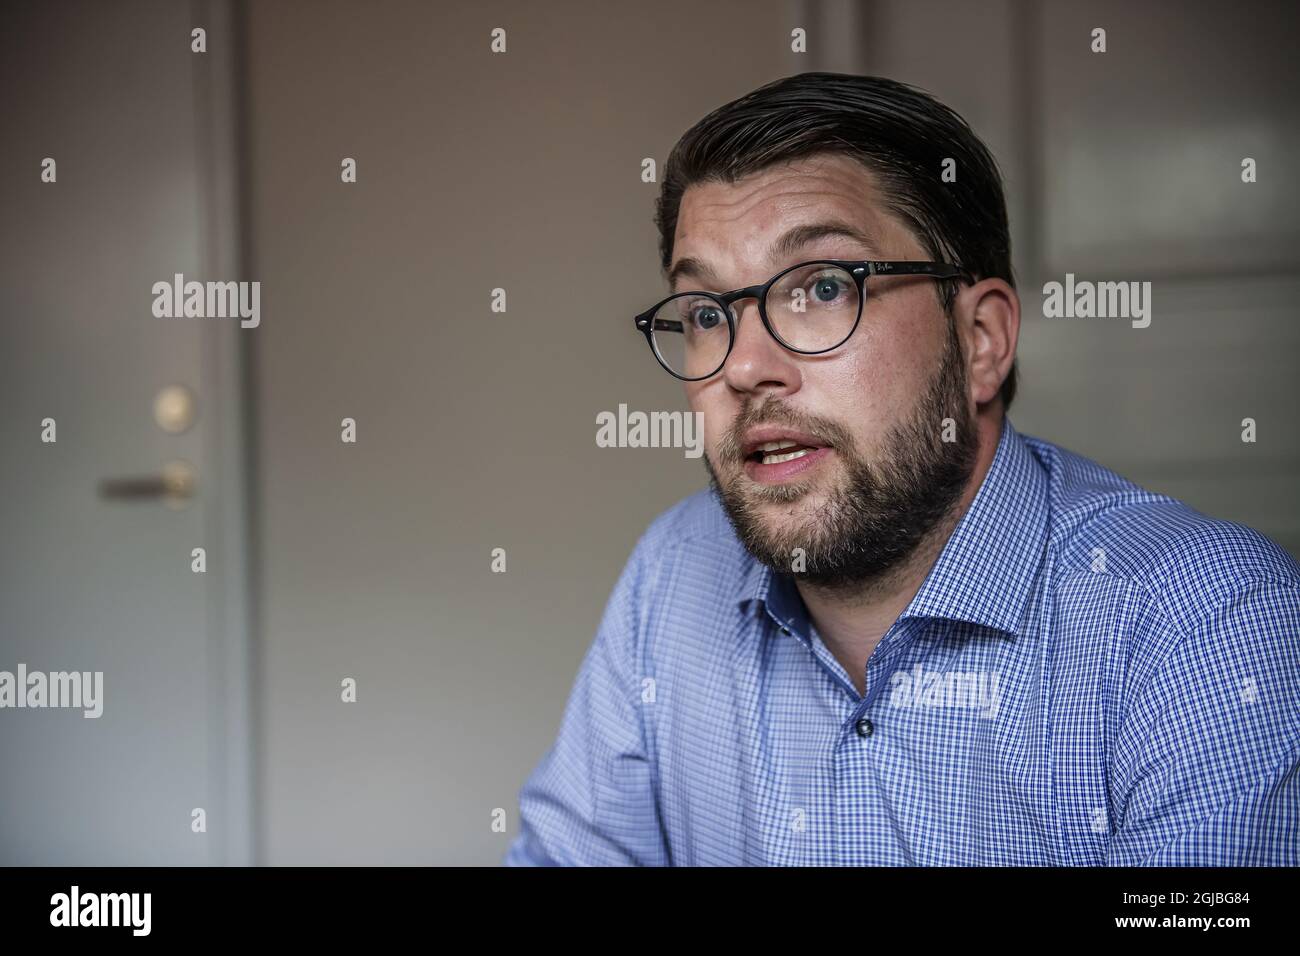 STOCKHOLM 2018-08-18 Jimmie Akesson, Chair of the Sweden Democrats during an interview before the general elections September 9, 2018. Foto: Anna-Karin Nilsson / EXP / TT / kod 7141 ** OUT SWEDEN OUT **  Stock Photo